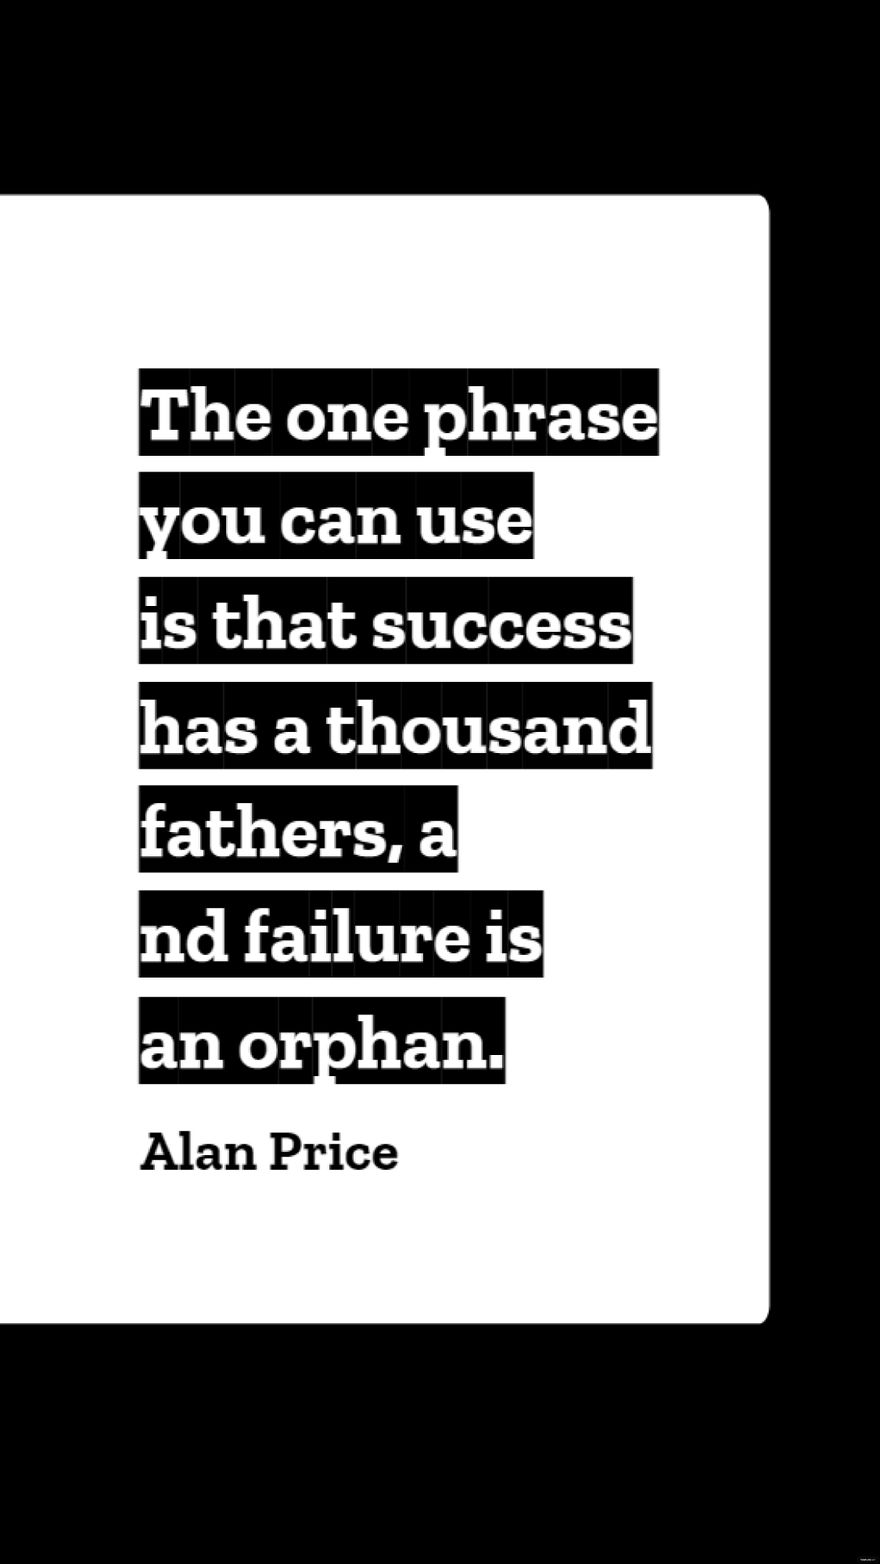 Free Alan Price - The one phrase you can use is that success has a thousand fathers, and failure is an orphan.